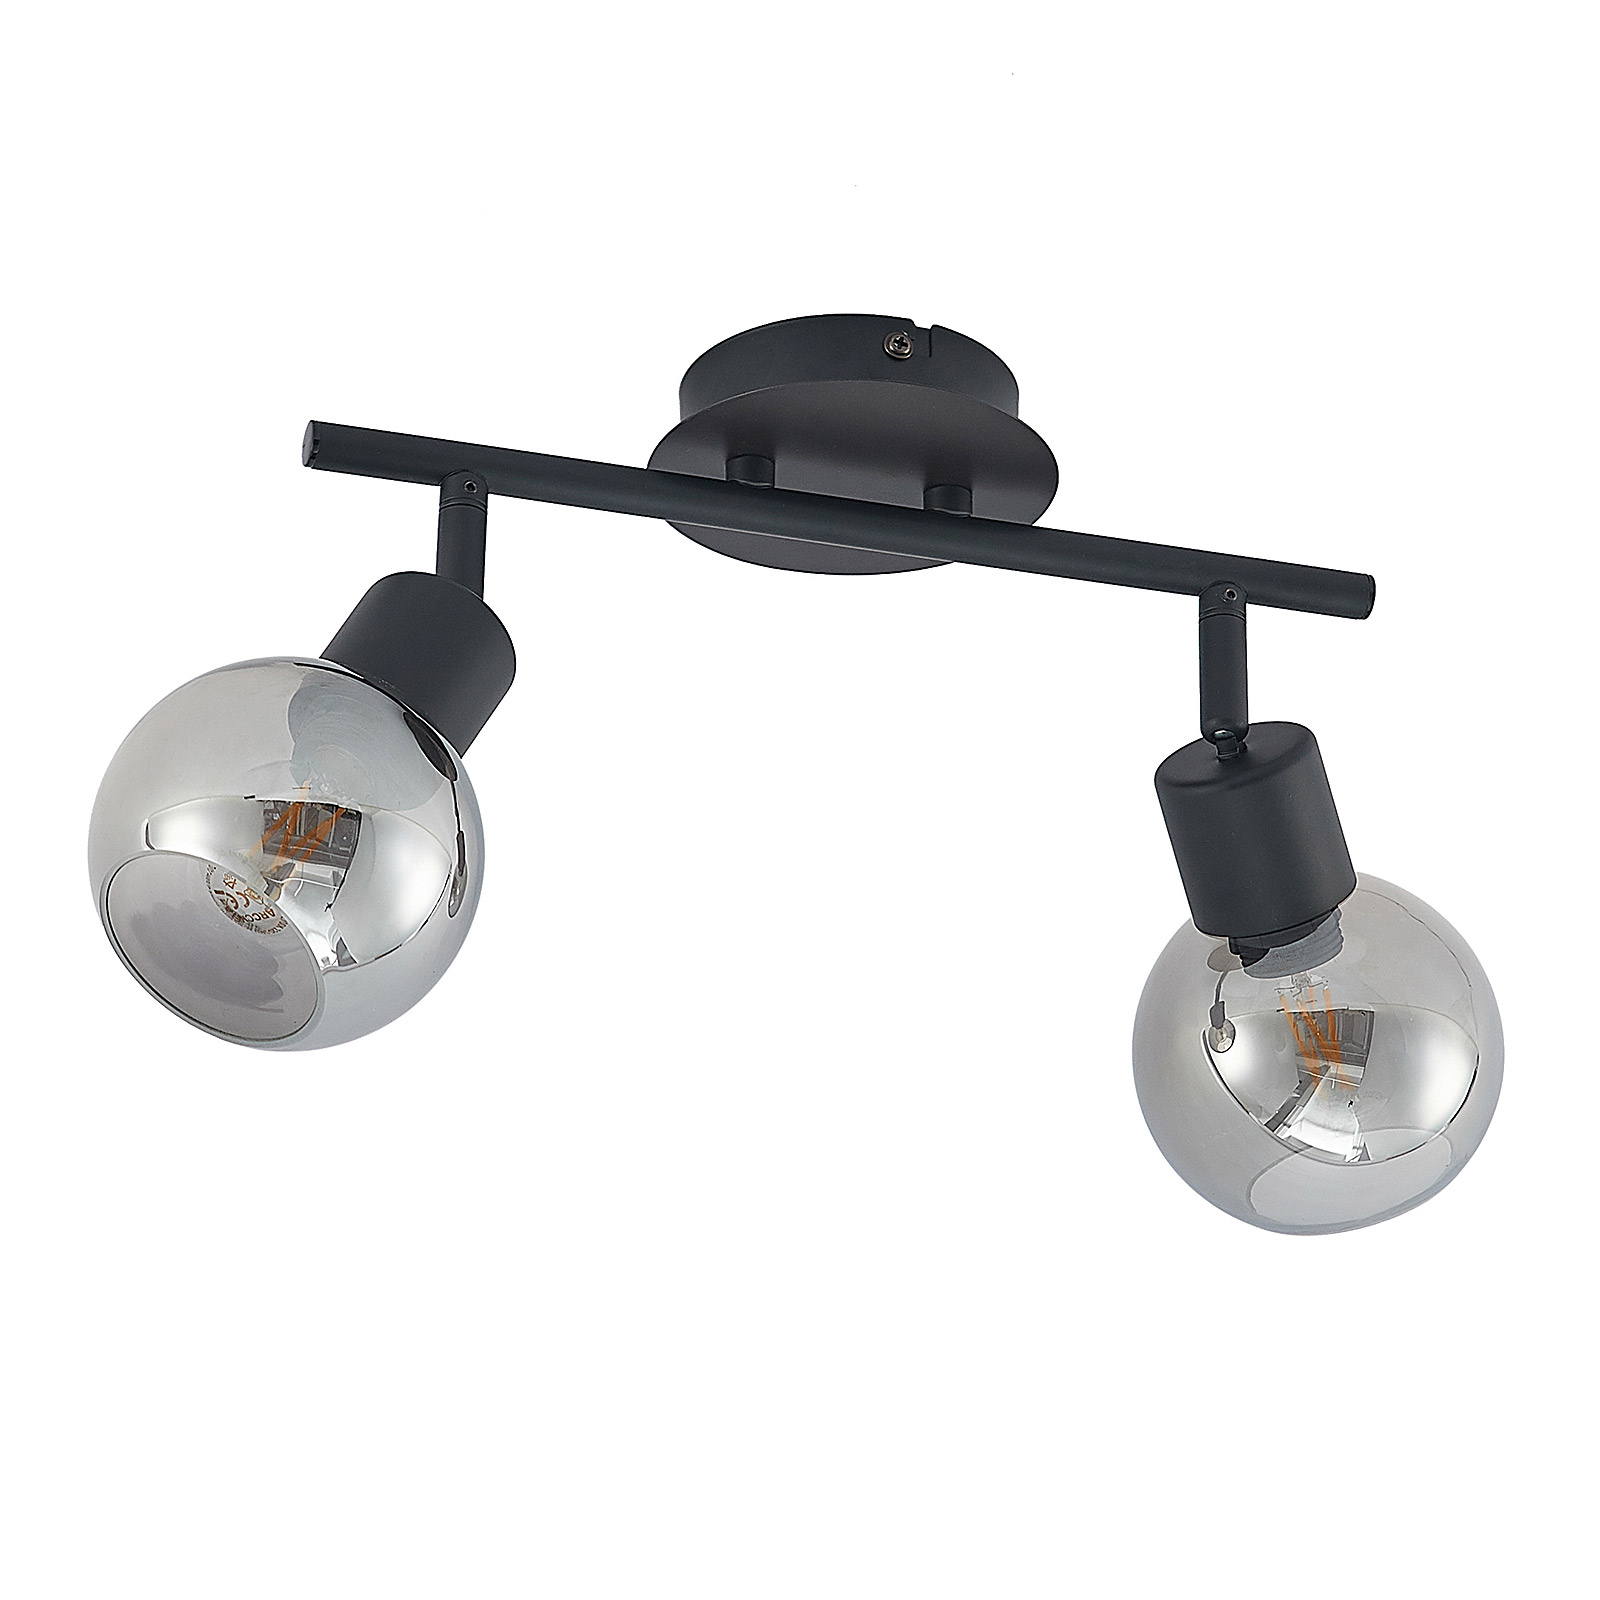 Lindby Eridia spot soffitto, nero, 2 luci